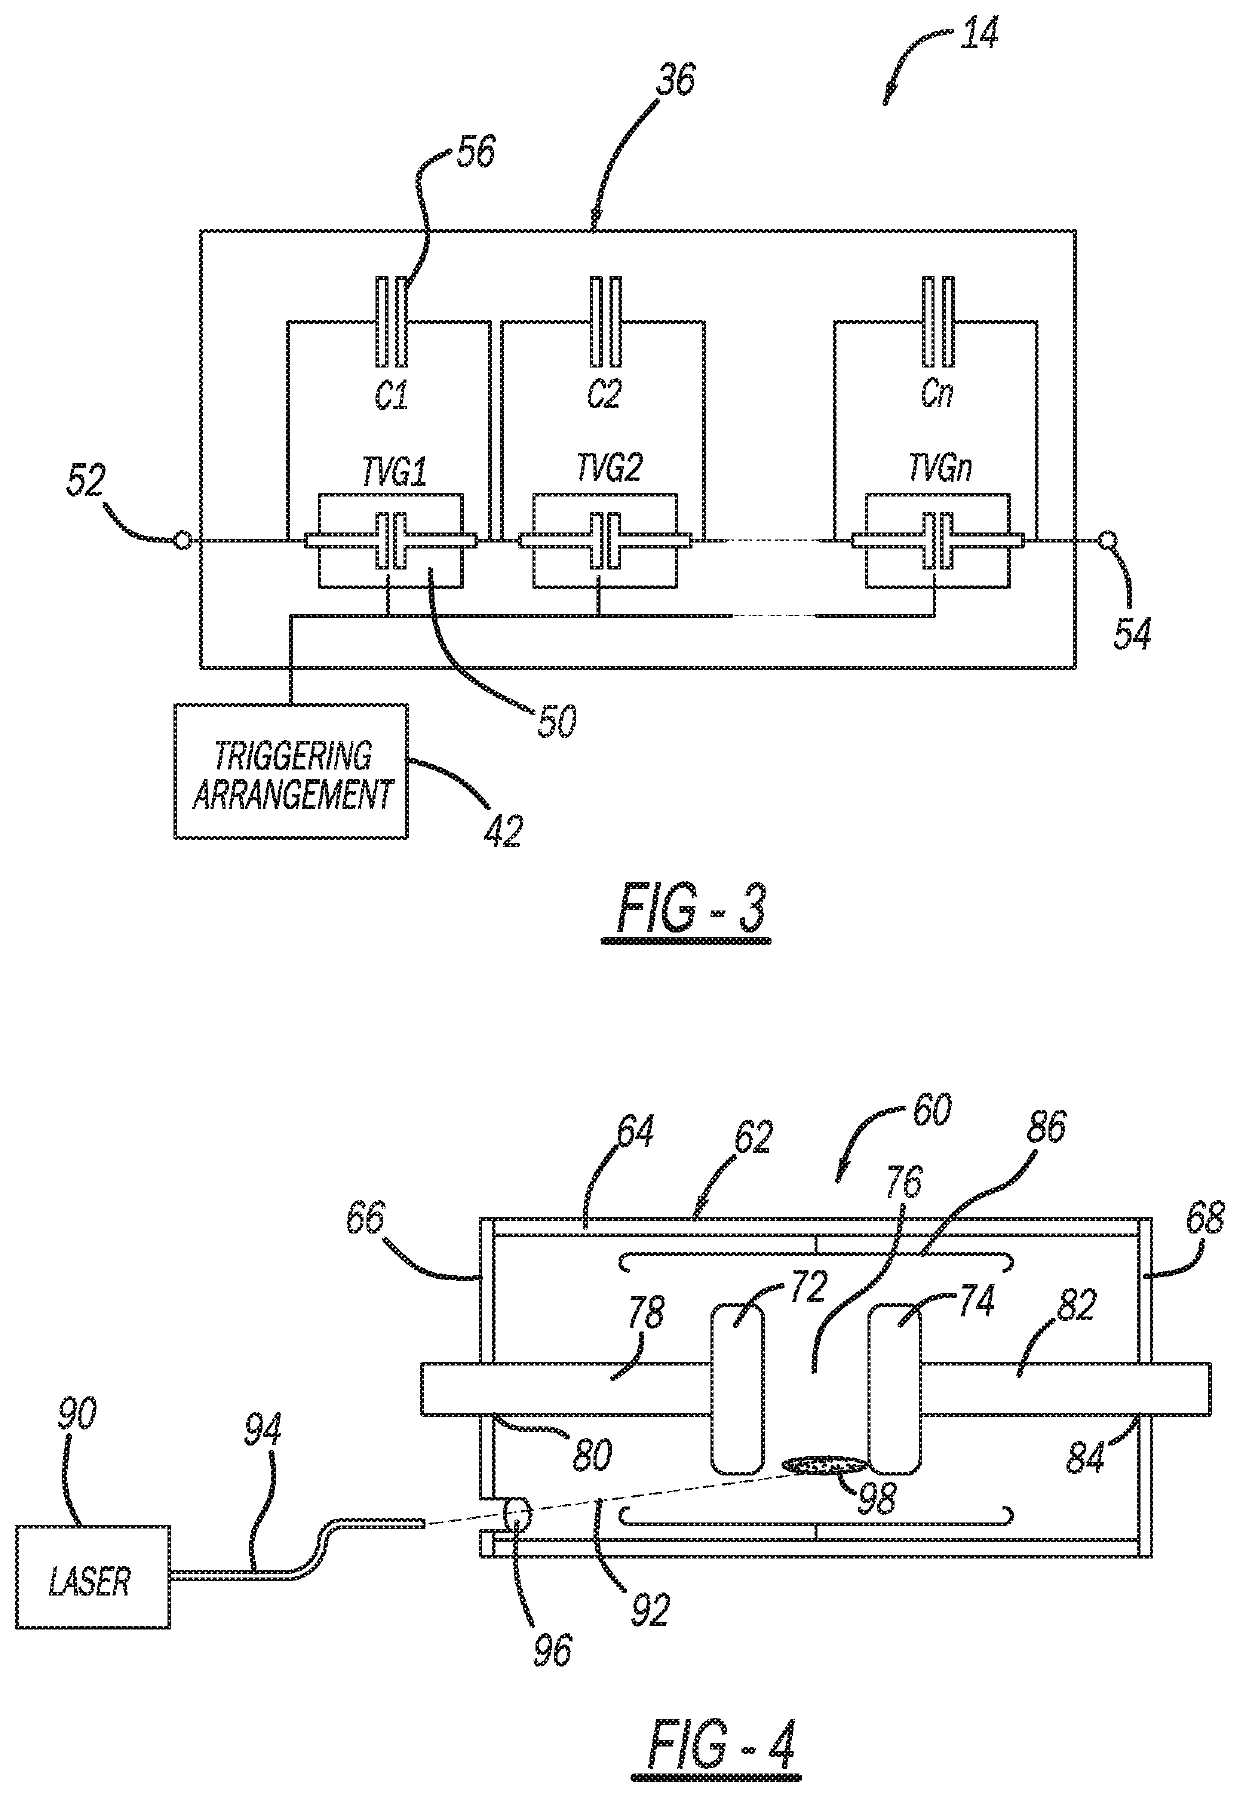 Triggered vacuum gap fault detection methods and devices